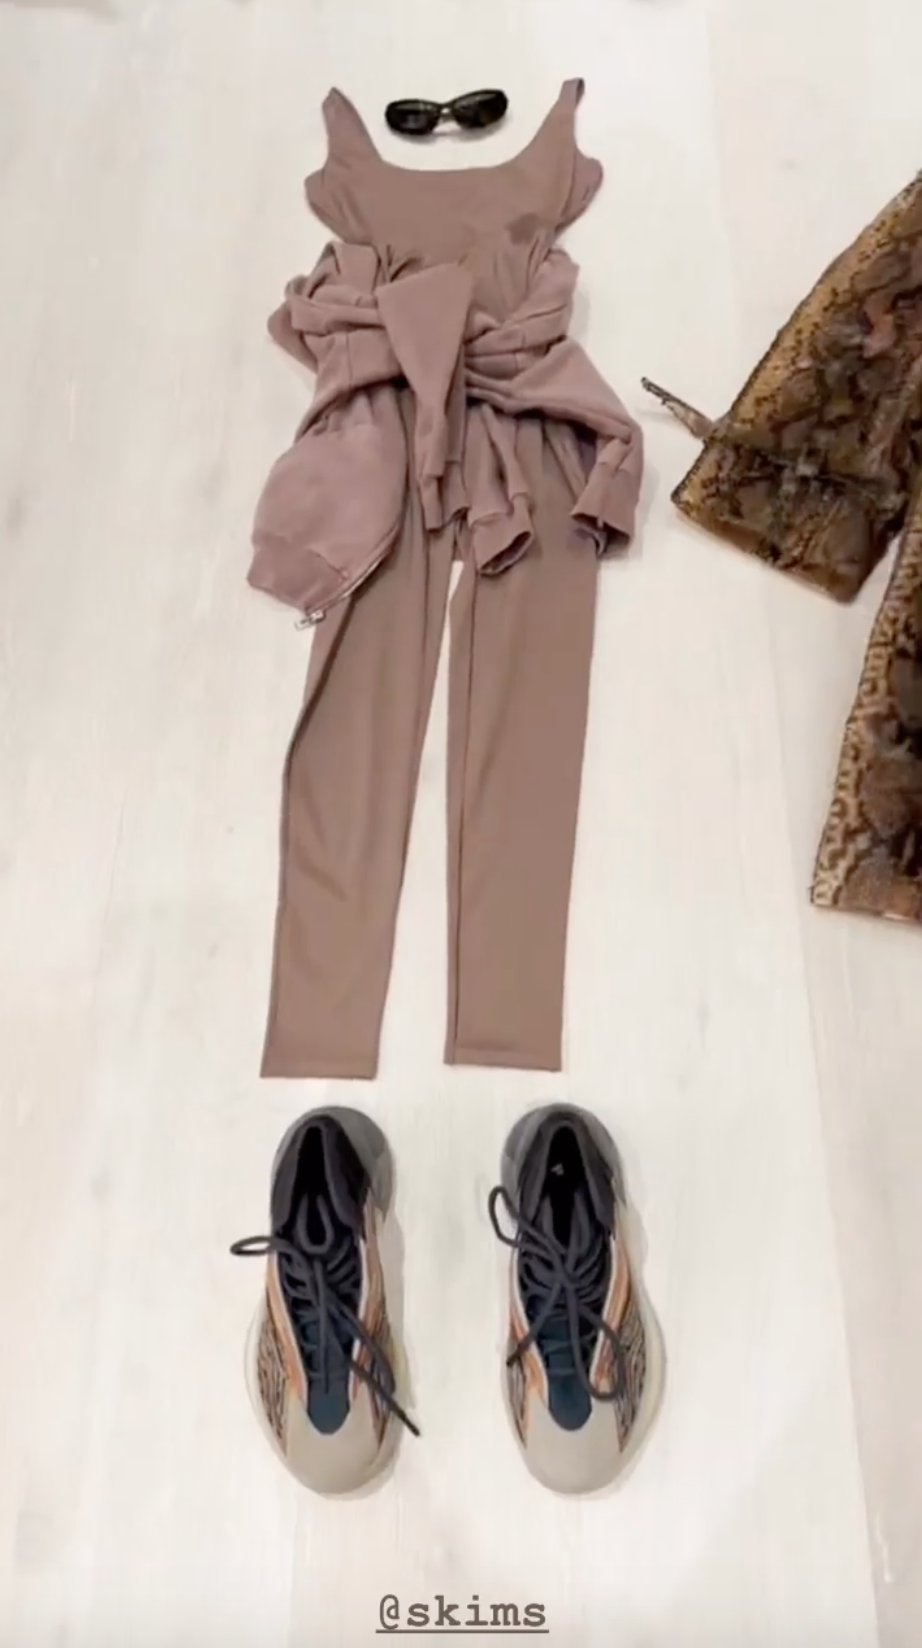 Kim Kardashian Recommends Styling Her New Skims Bodysuit With Ex Kanye West’s Yeezy Sneakers